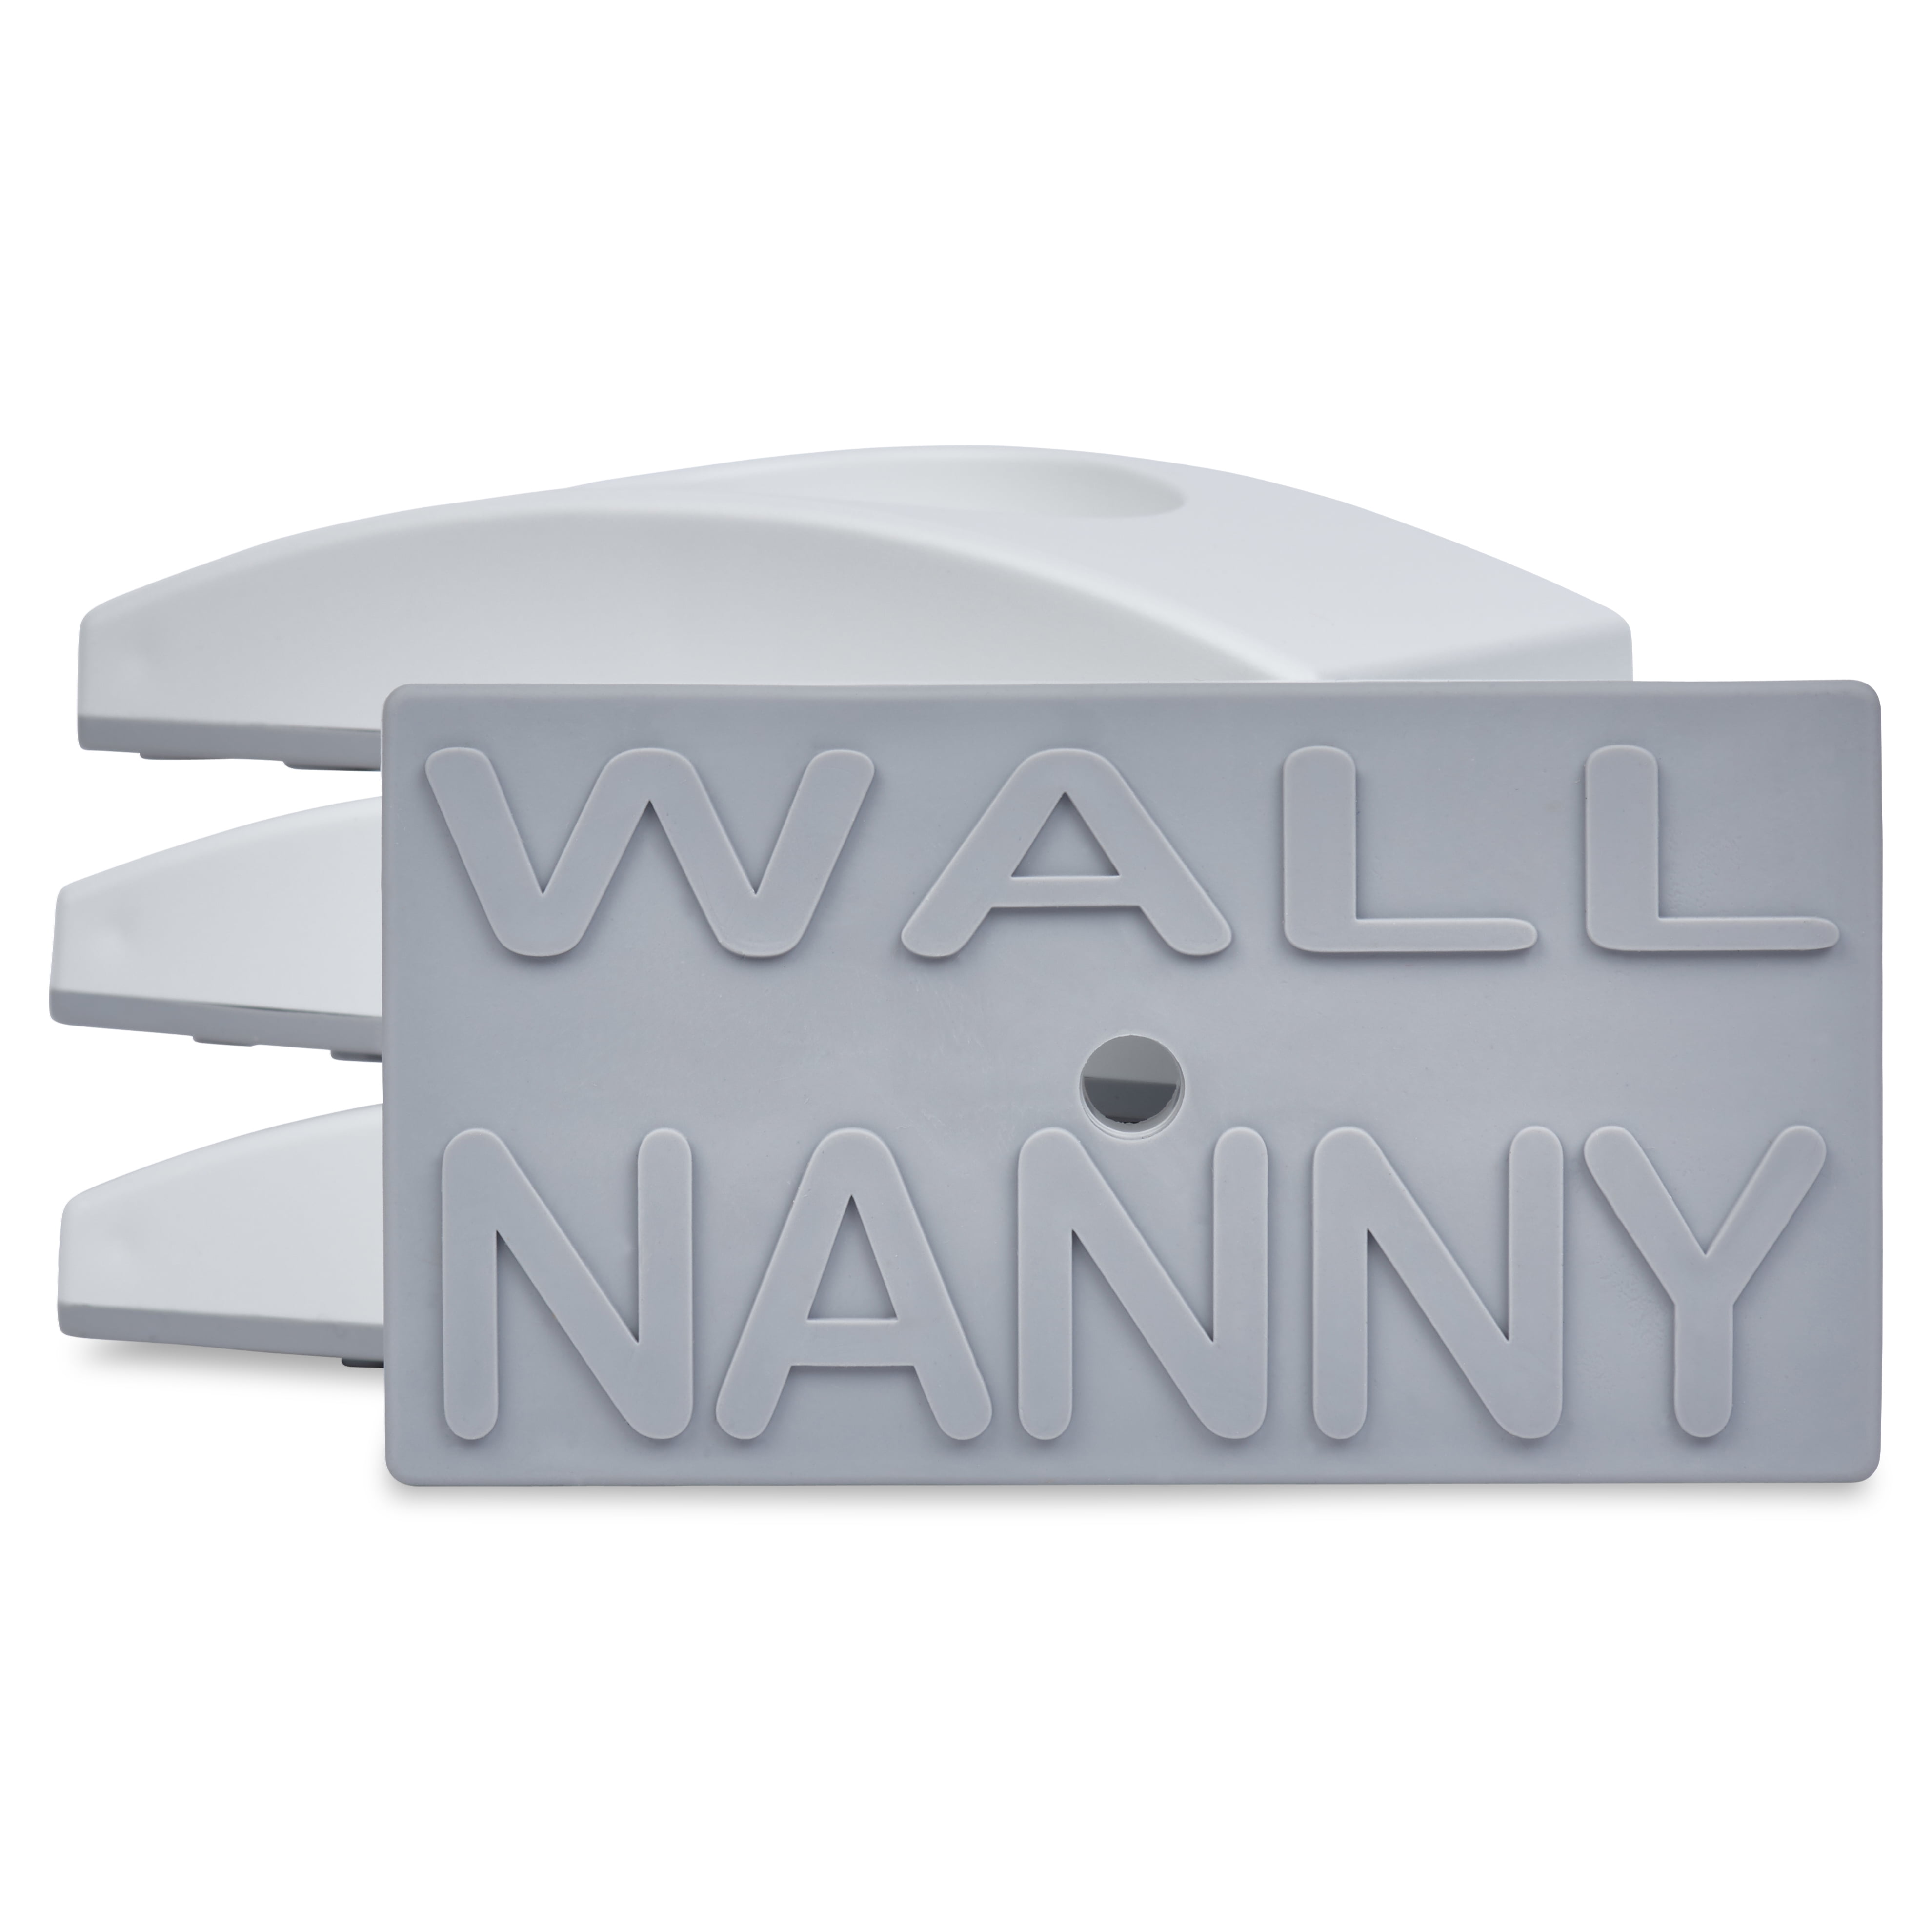 stair gate wall protector